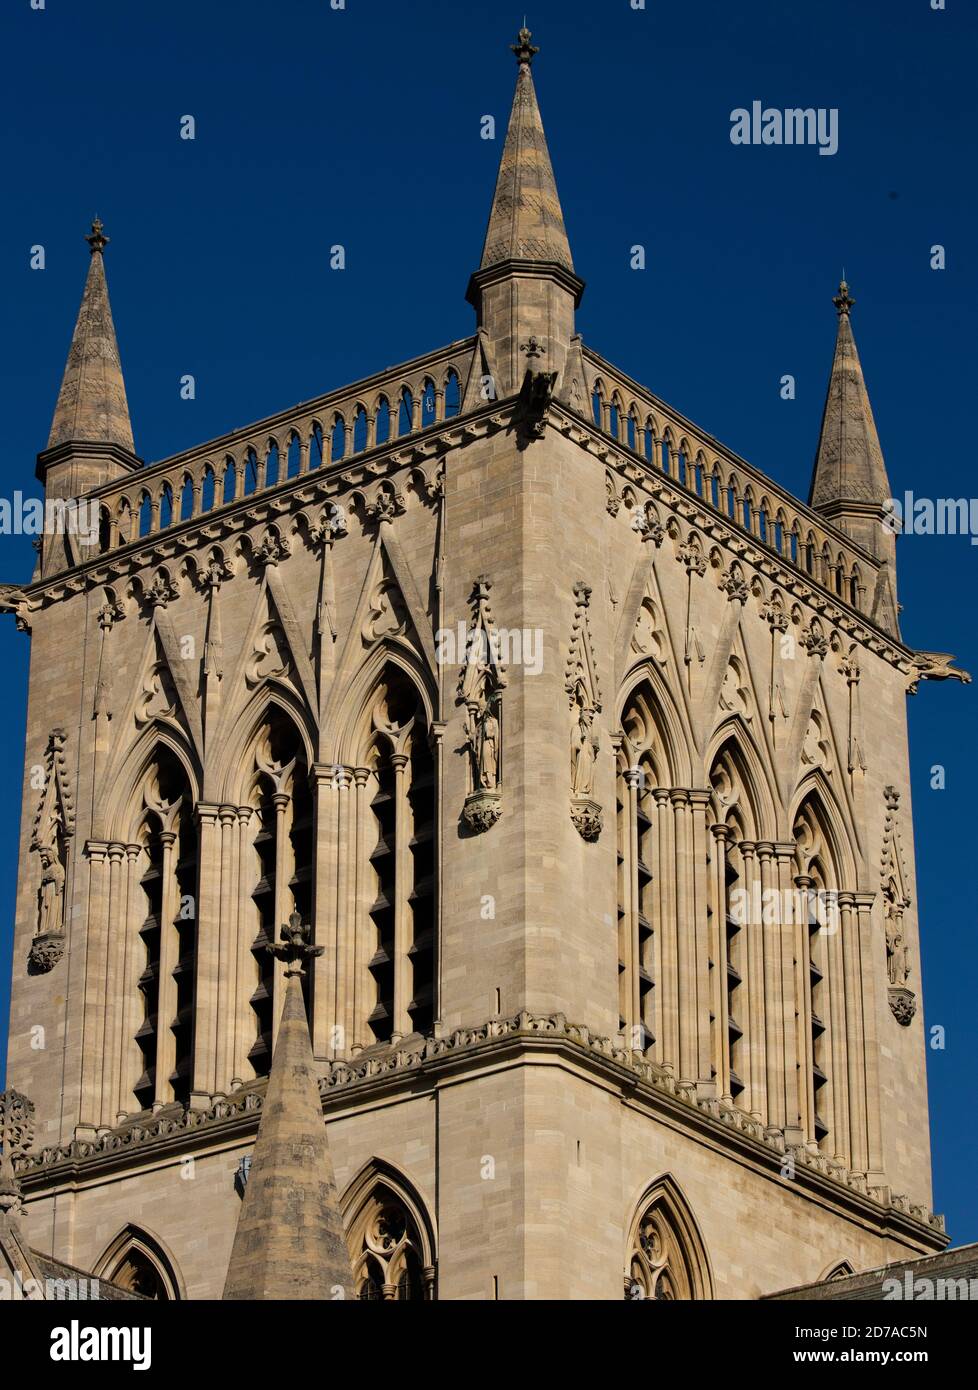 St Johns College, Chapel tower an iconic feature of the Cambridge skyline. England, UK Stock Photo